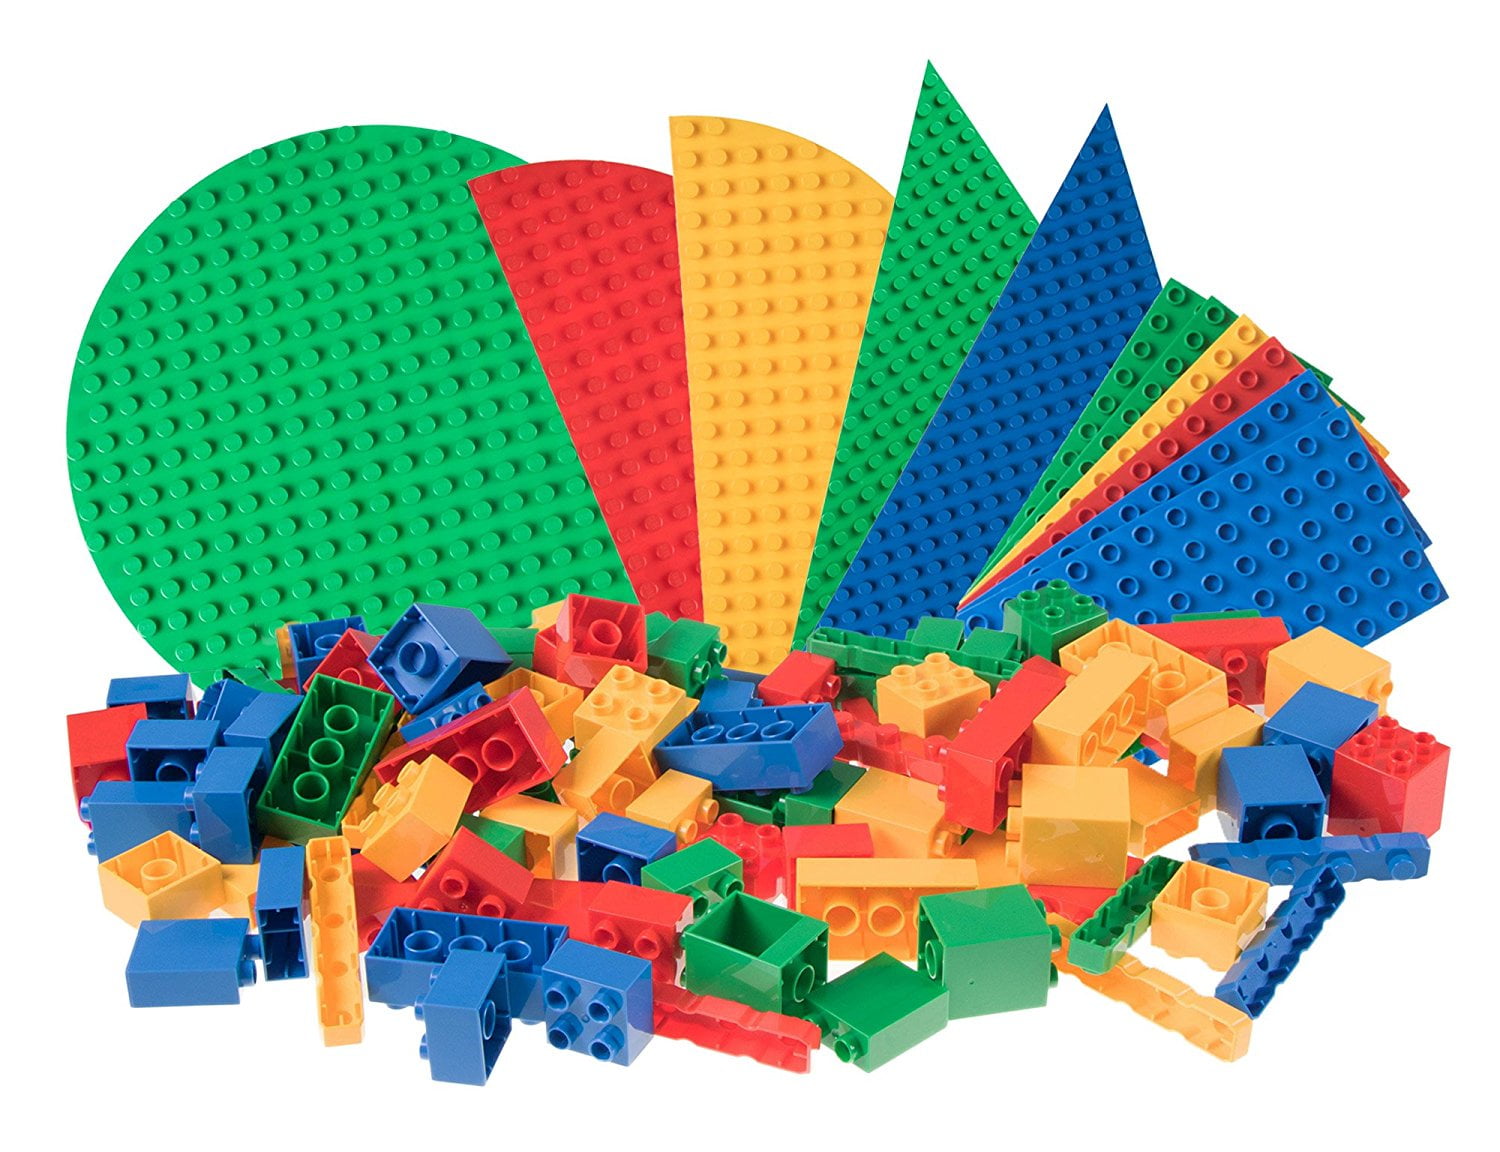 204 Pieces Building Brick Set 100% Compatible with All Major Brands Premium Building Bricks with Big Pegs in 24 Fun Colors 3 Large Block Sizes For Ages 3+ Classic Big Briks by Strictly Briks